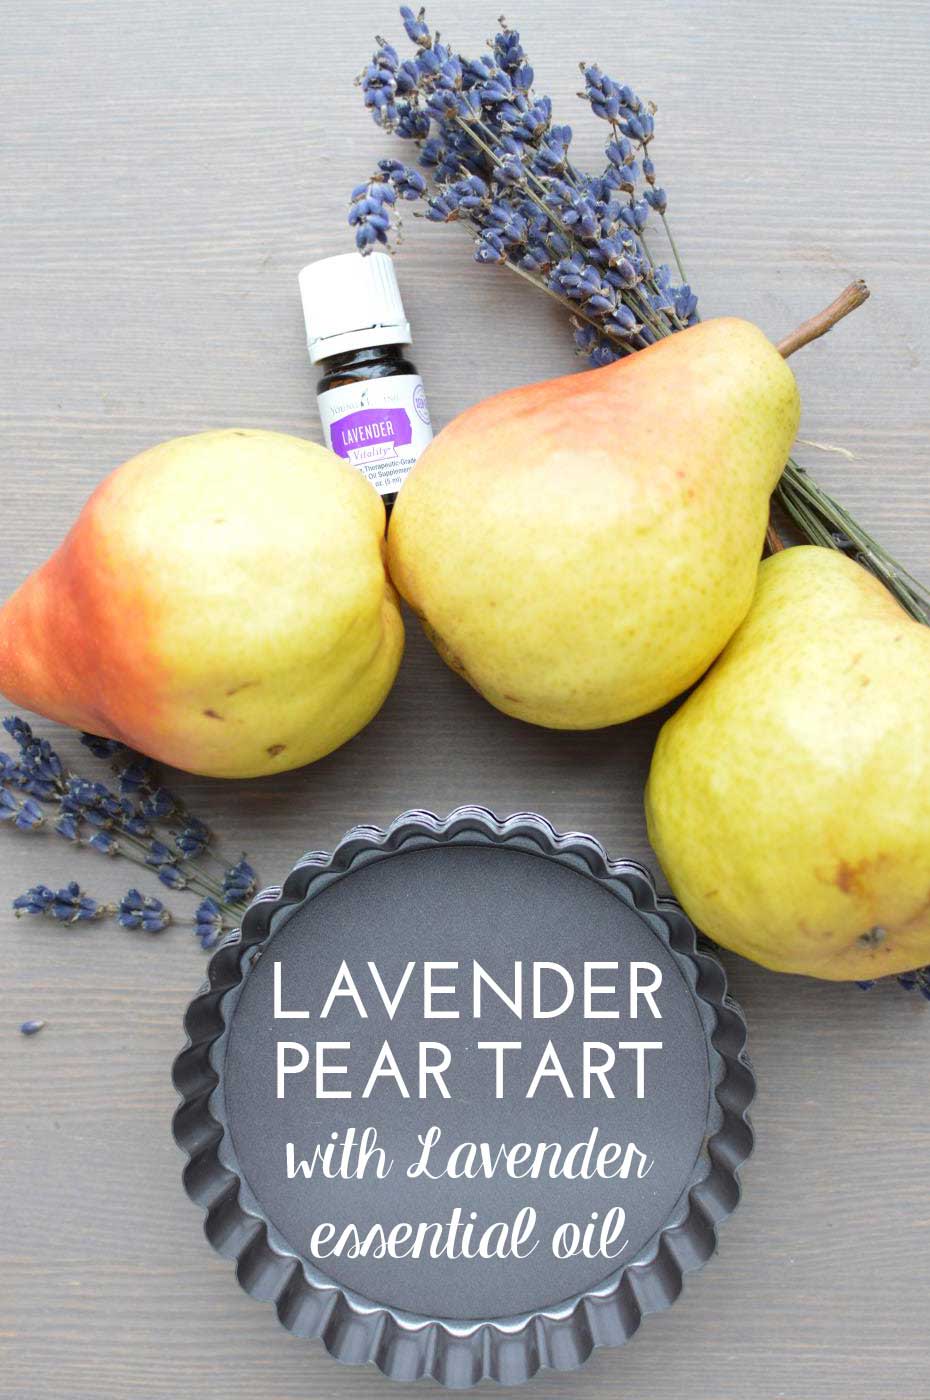 Young-Living-lavender-pear-tart-recipe-essential-oil